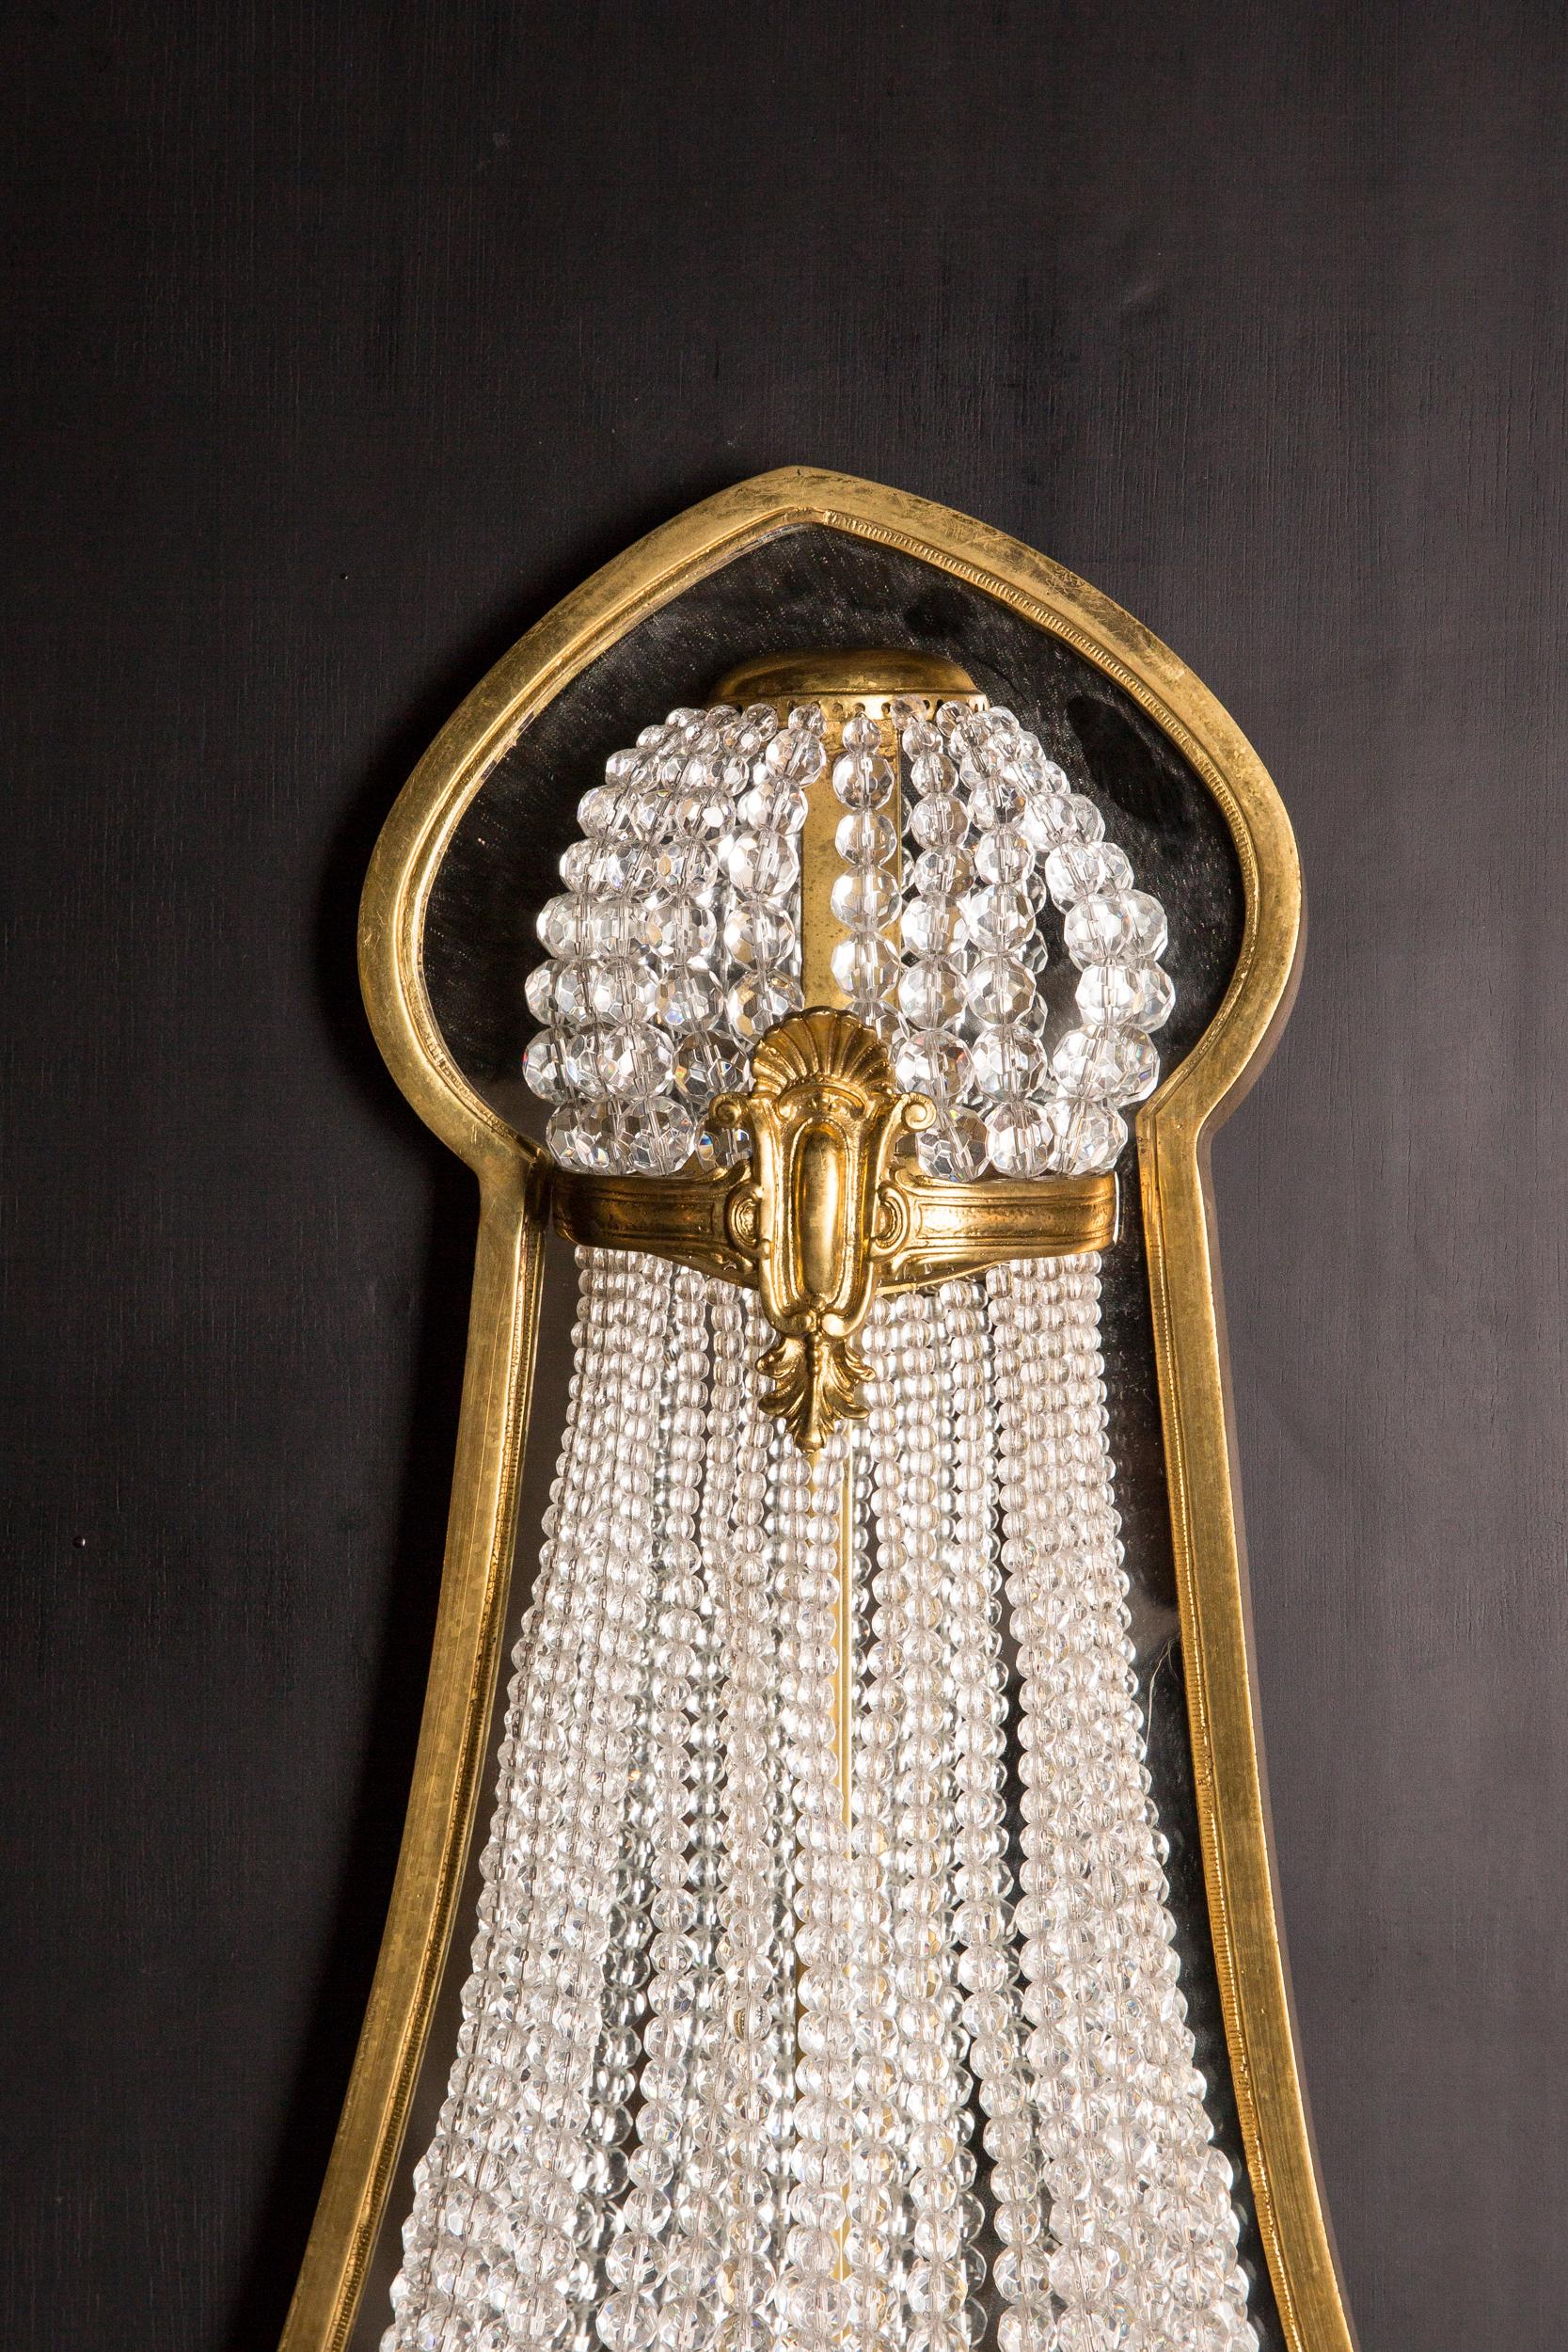 20th Century Majestic bronze Crystal Sconces Chandelier Wall Applique in Louis Seize Style